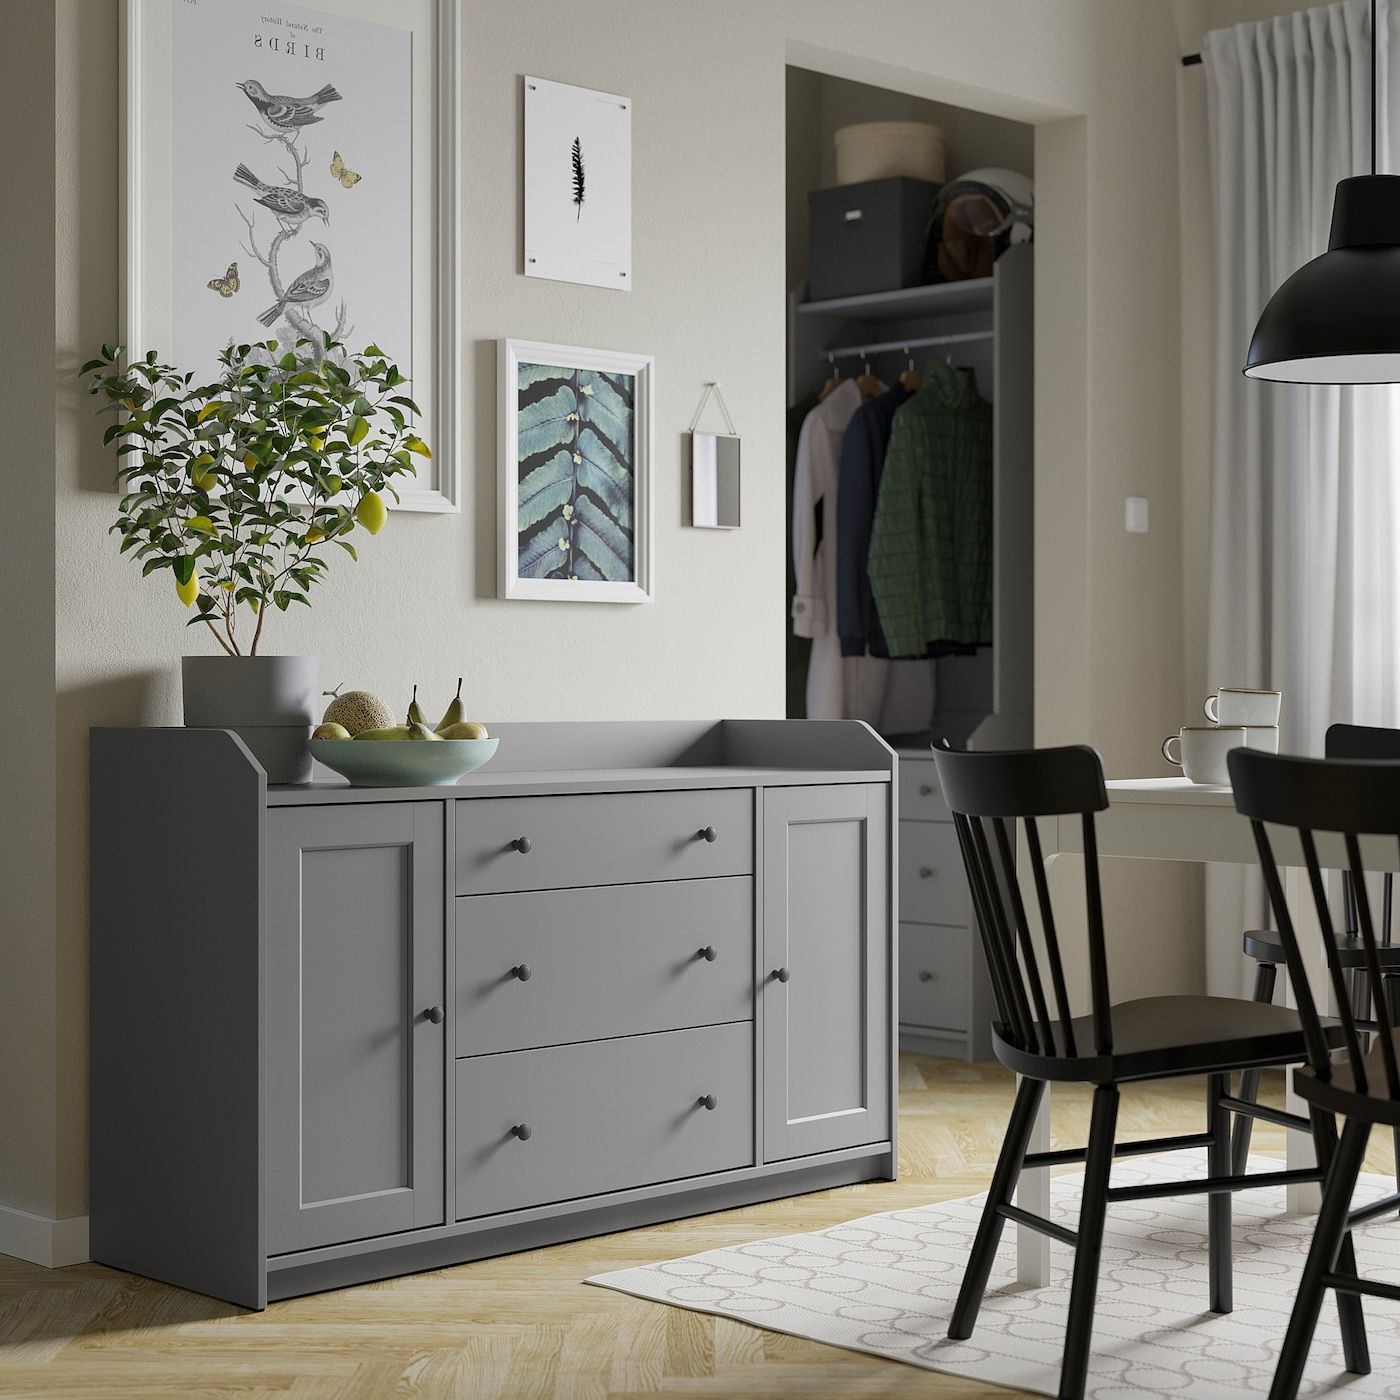 Hauga Sideboard, Gray, 140x84 Cm (551/8x331/8") – Ikea Ca Intended For Gray Wooden Sideboards (Gallery 6 of 20)